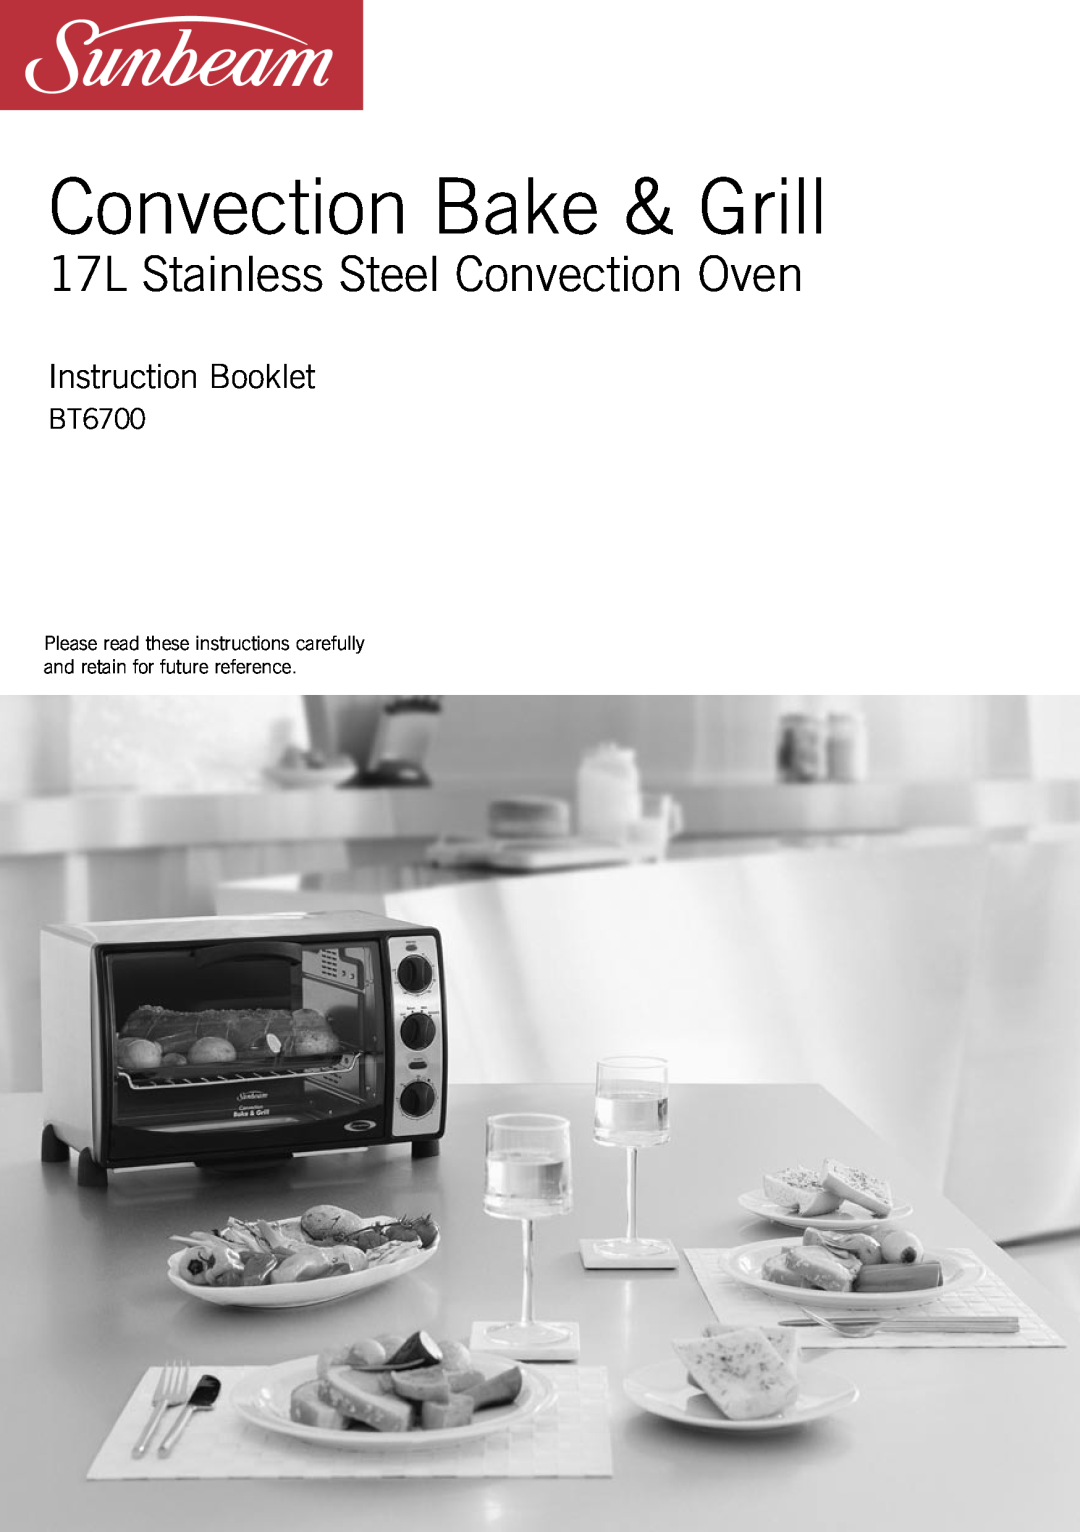 Sunbeam BT6700 manual Convection Bake & Grill, 17L Stainless Steel Convection Oven, Instruction Booklet 